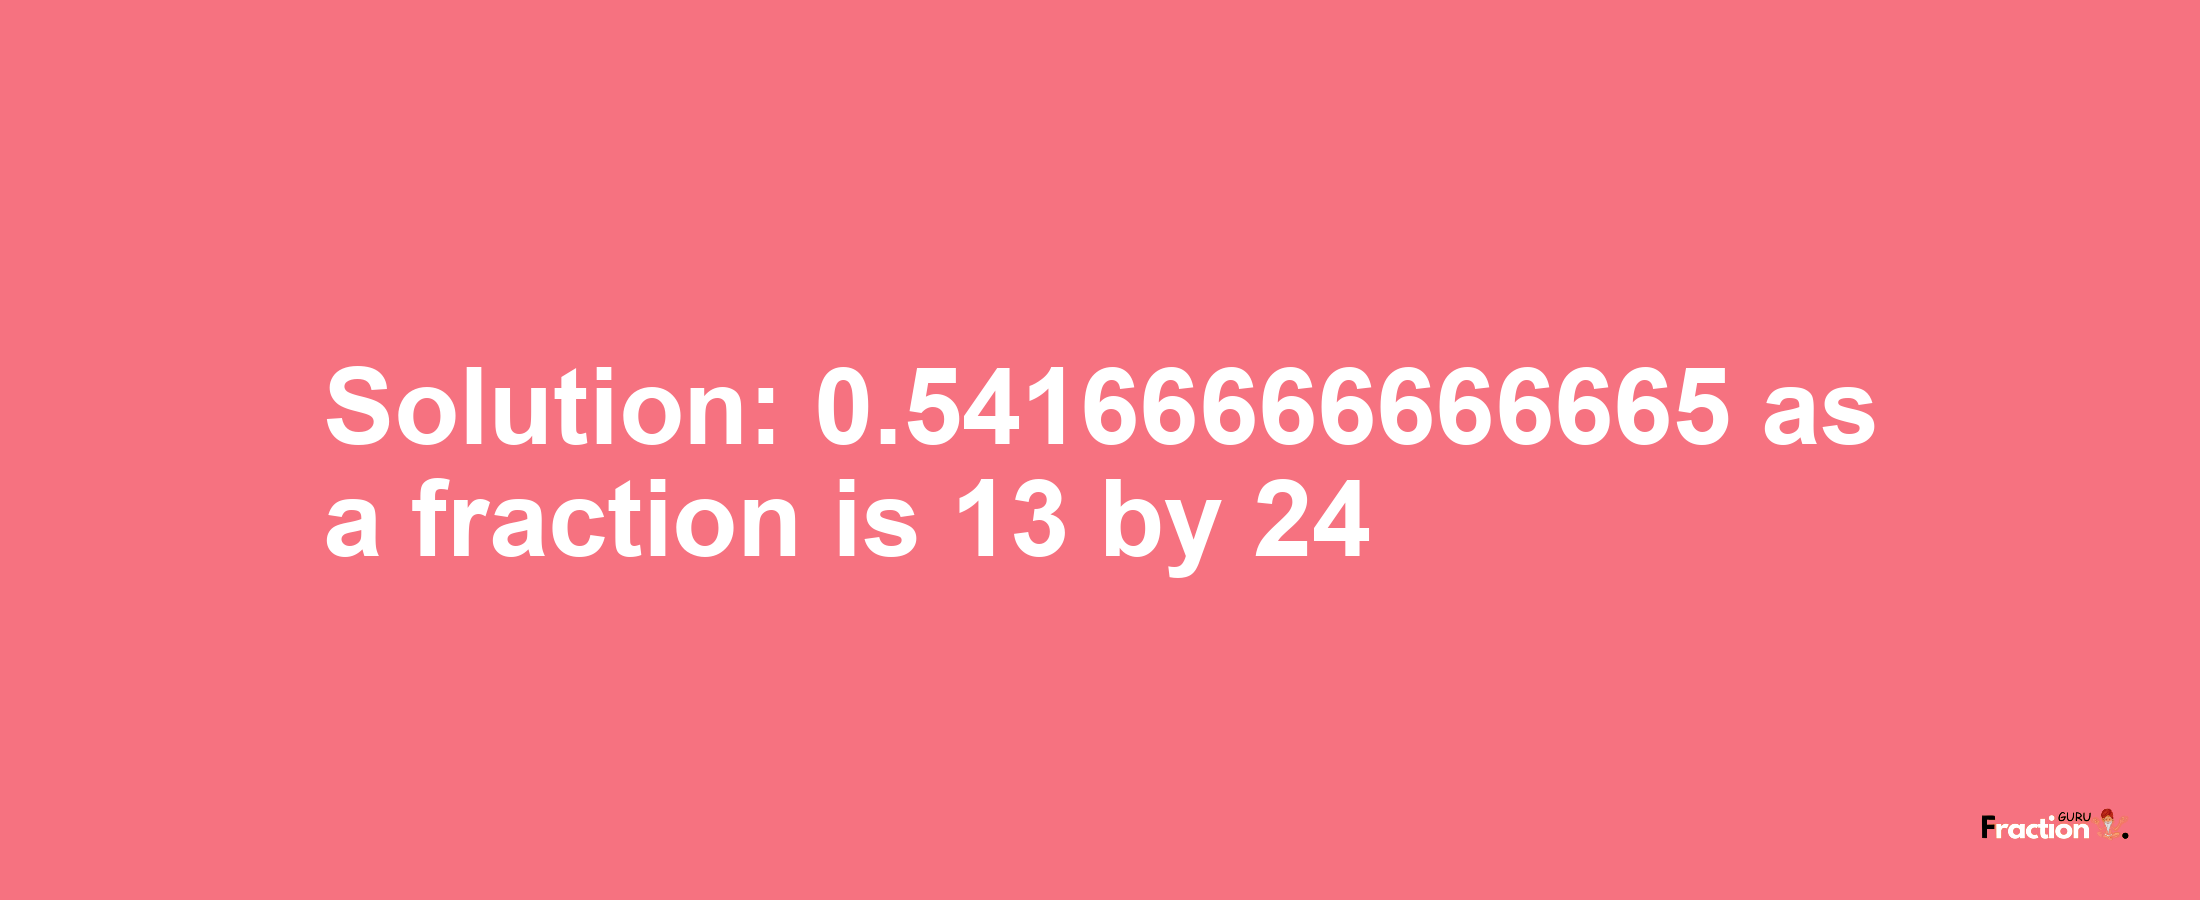 Solution:0.54166666666665 as a fraction is 13/24